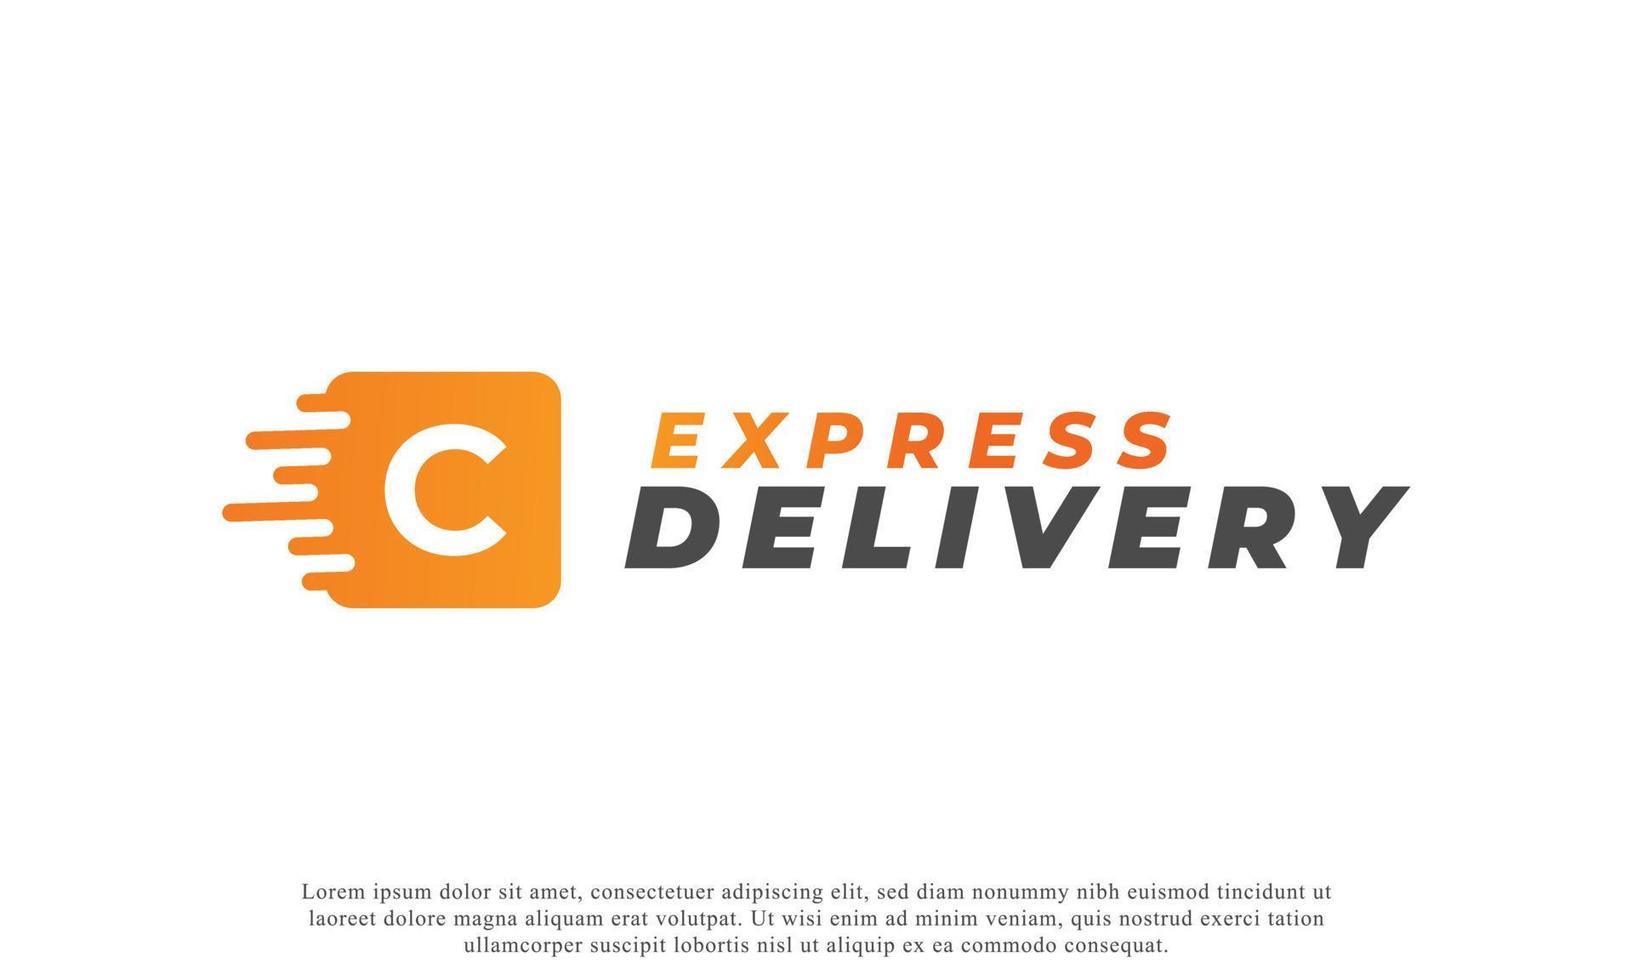 Creative Initial Letter C Logo. Orange Shape C Letter with Fast Shipping Delivery Truck Icon. Usable for Business and Branding Logos. Flat Vector Logo Design Ideas Template Element